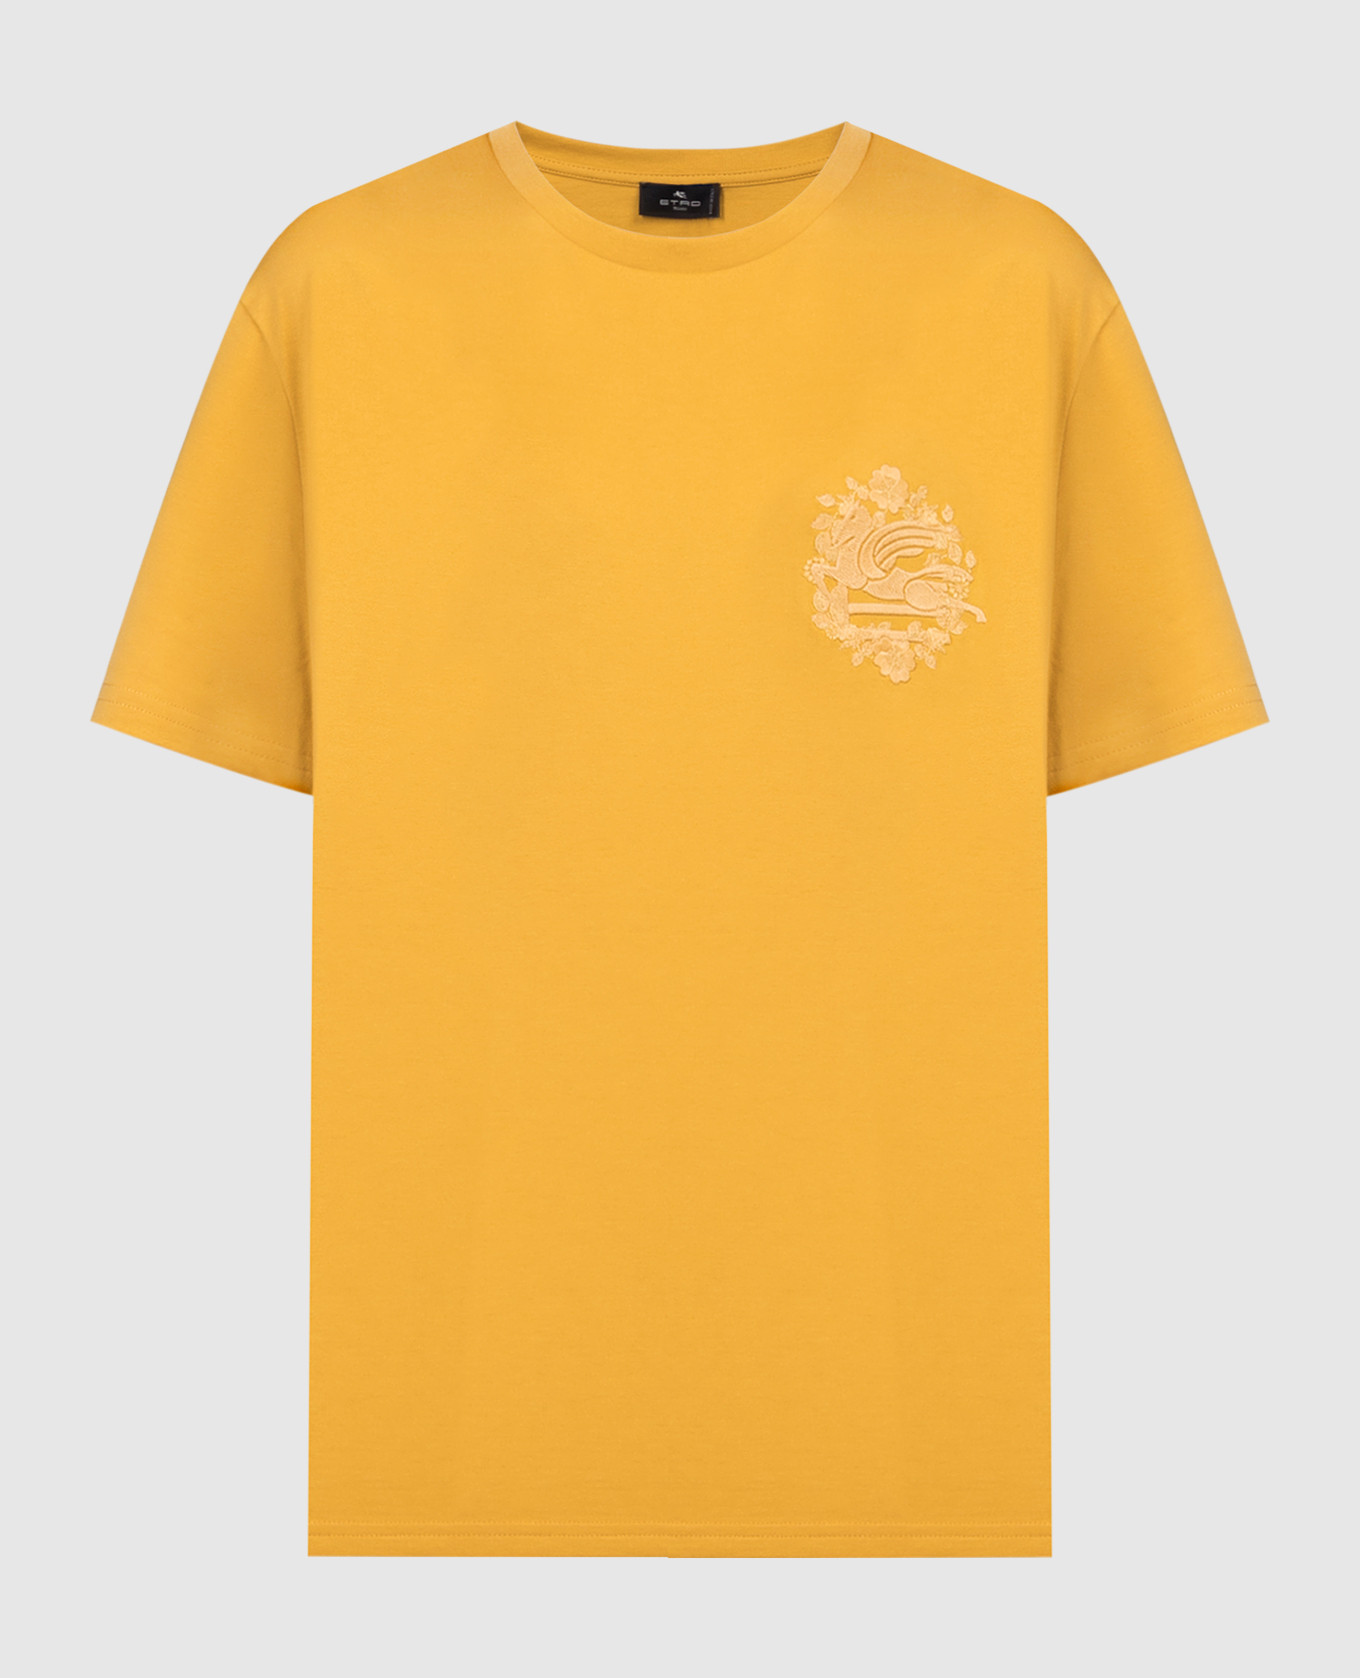 Yellow t-shirt with Pegaso logo embroidery